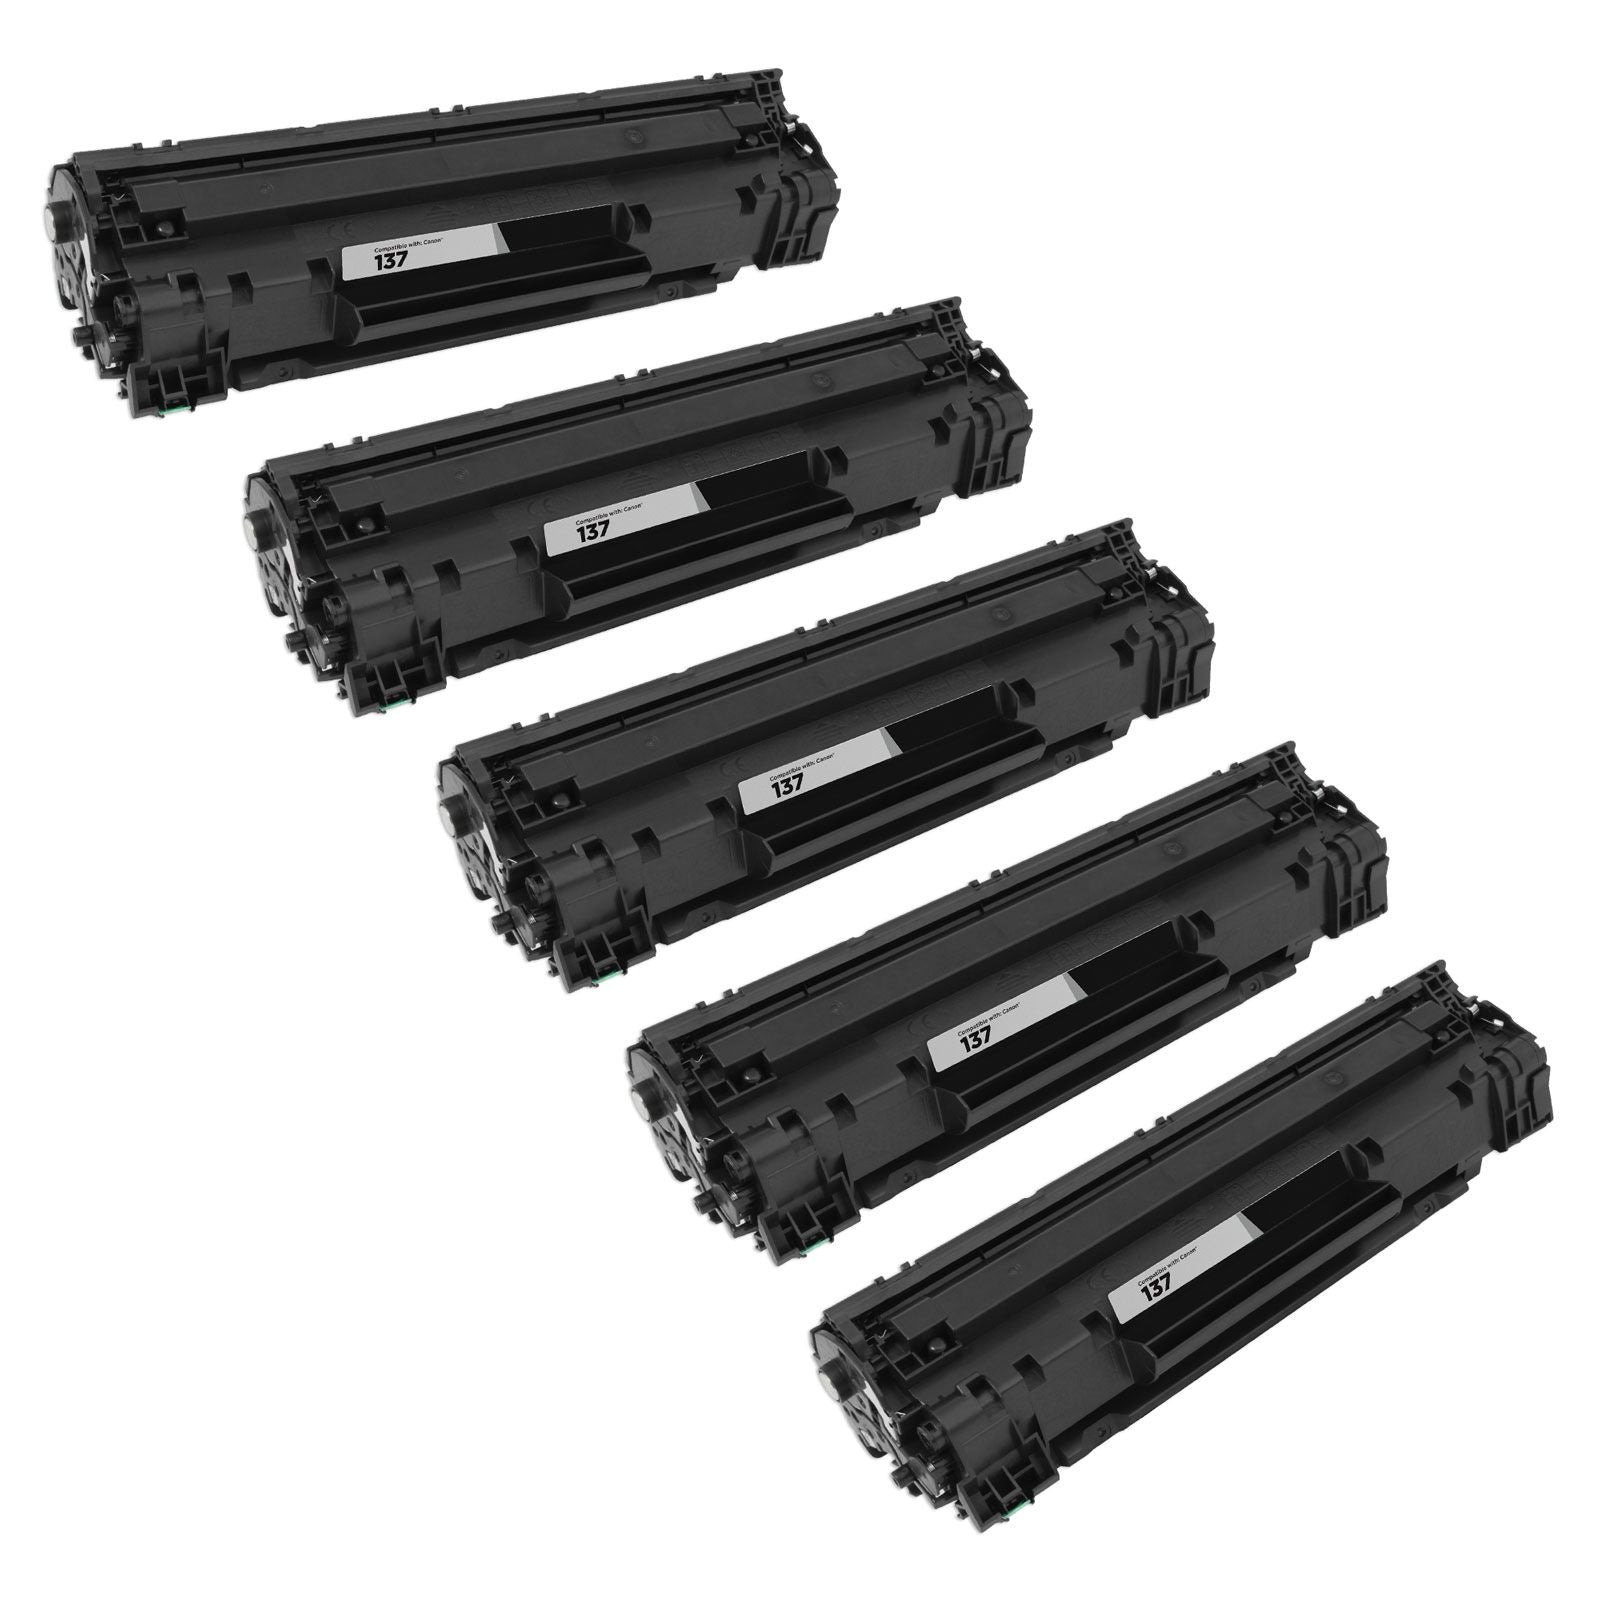 137 IMPERIAL BRAND 5 PACK CANON 137 LASER TONER 9435B001 2400 PAGES